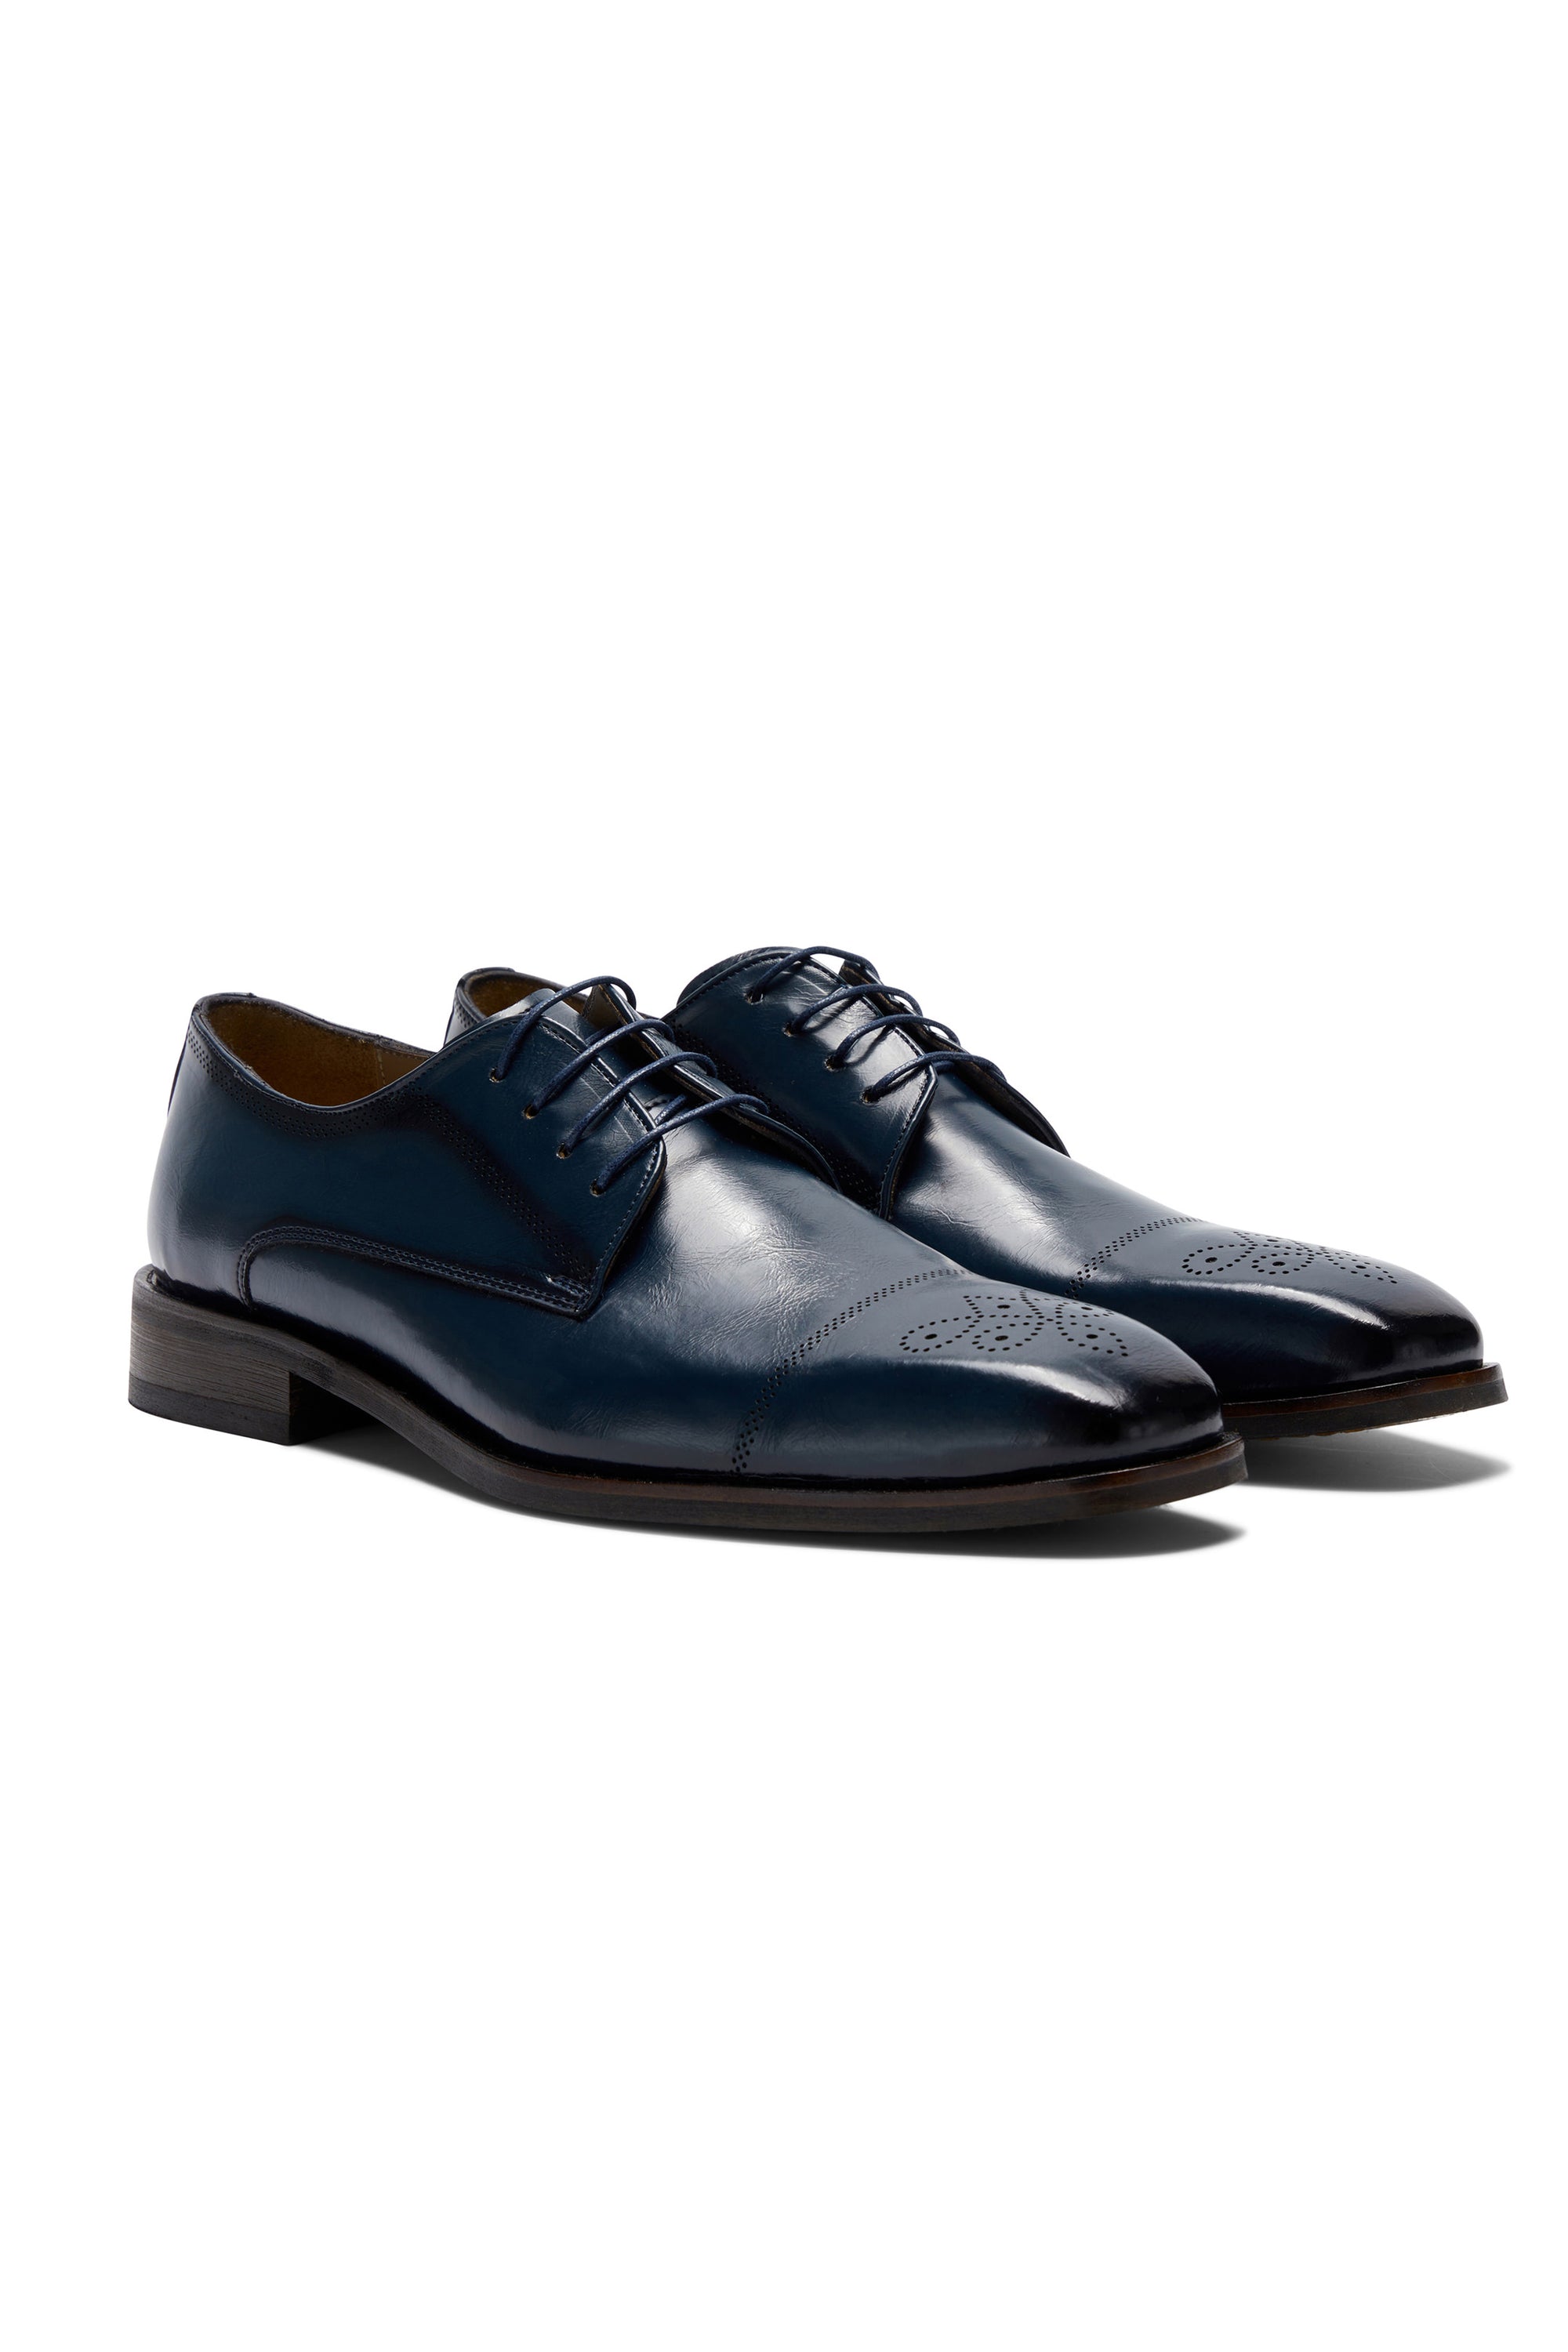 Louis Navy Formal Mens Shoe-Side view